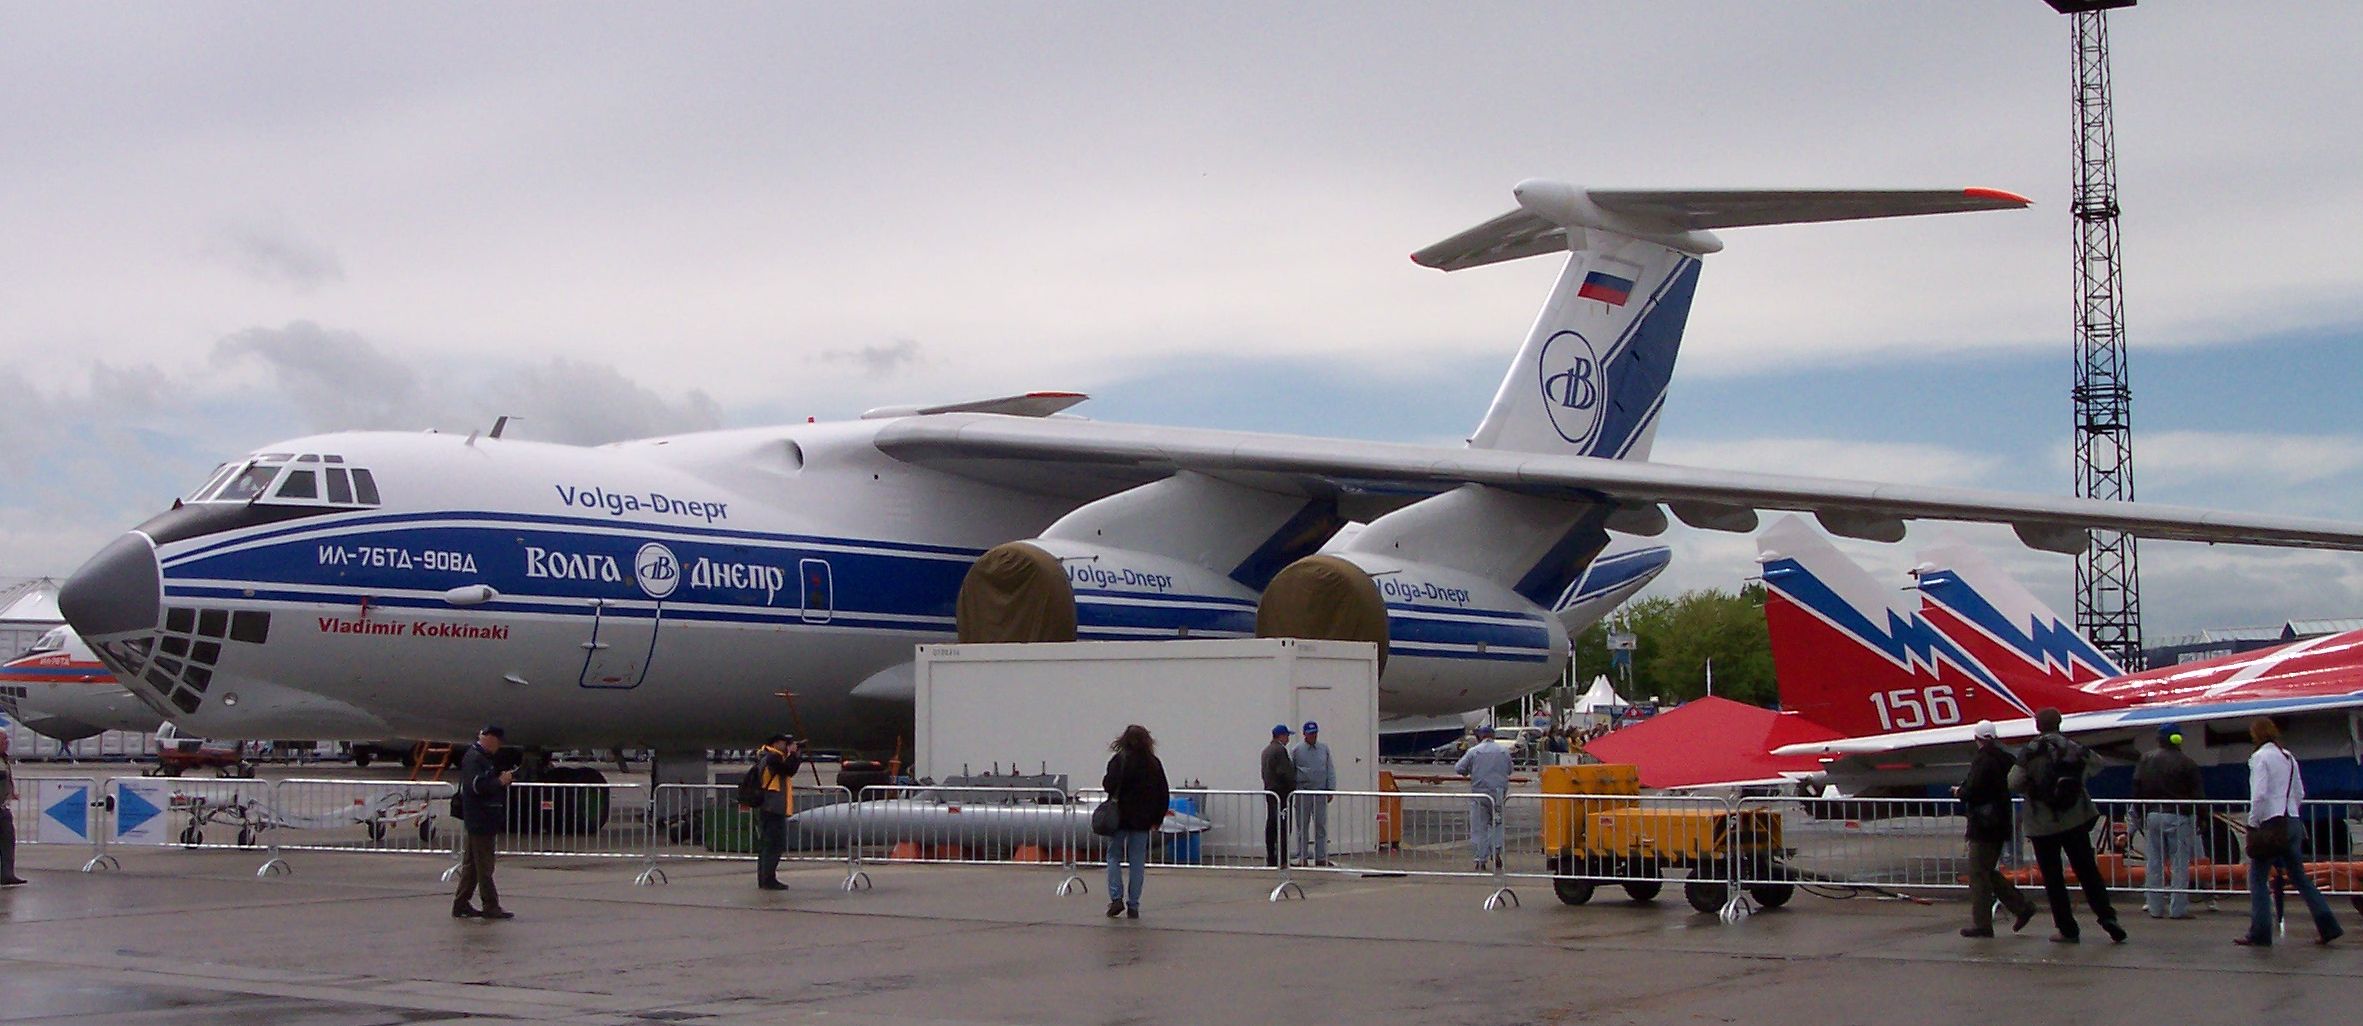 Discover the History and Milestones of Volga-Dnepr Airlines: The World’s Largest Cargo Airline